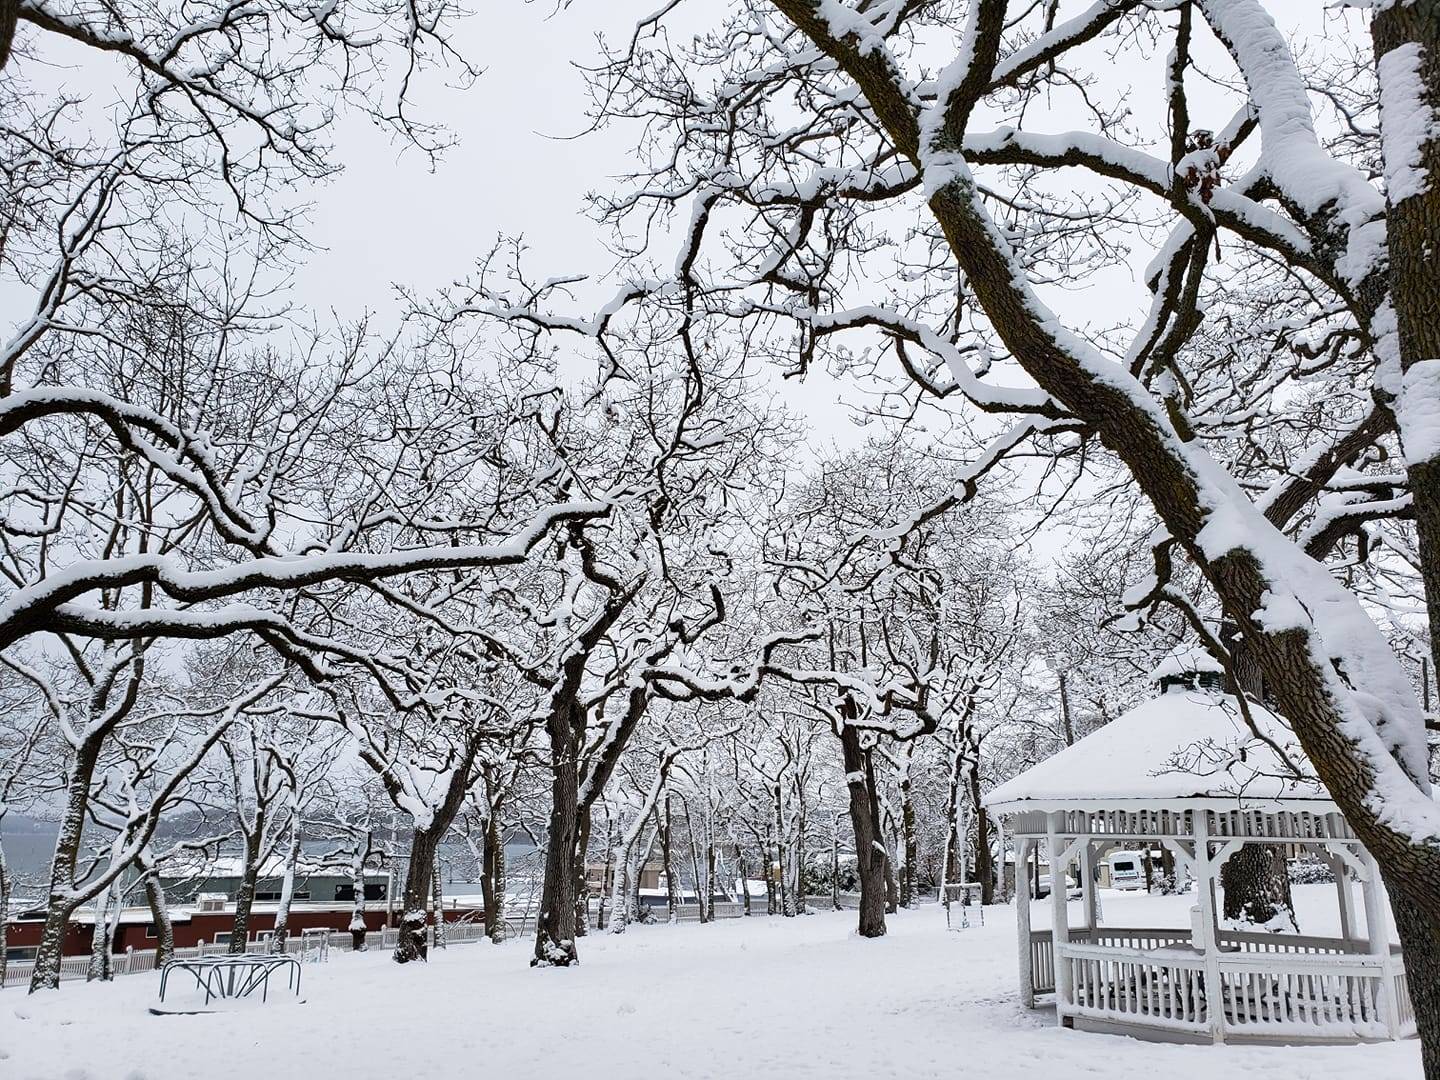 The grand Garry oaks at Smith Park look even more majestic with snow-covered branches. Photo by Wilma Vernon LeDuc.